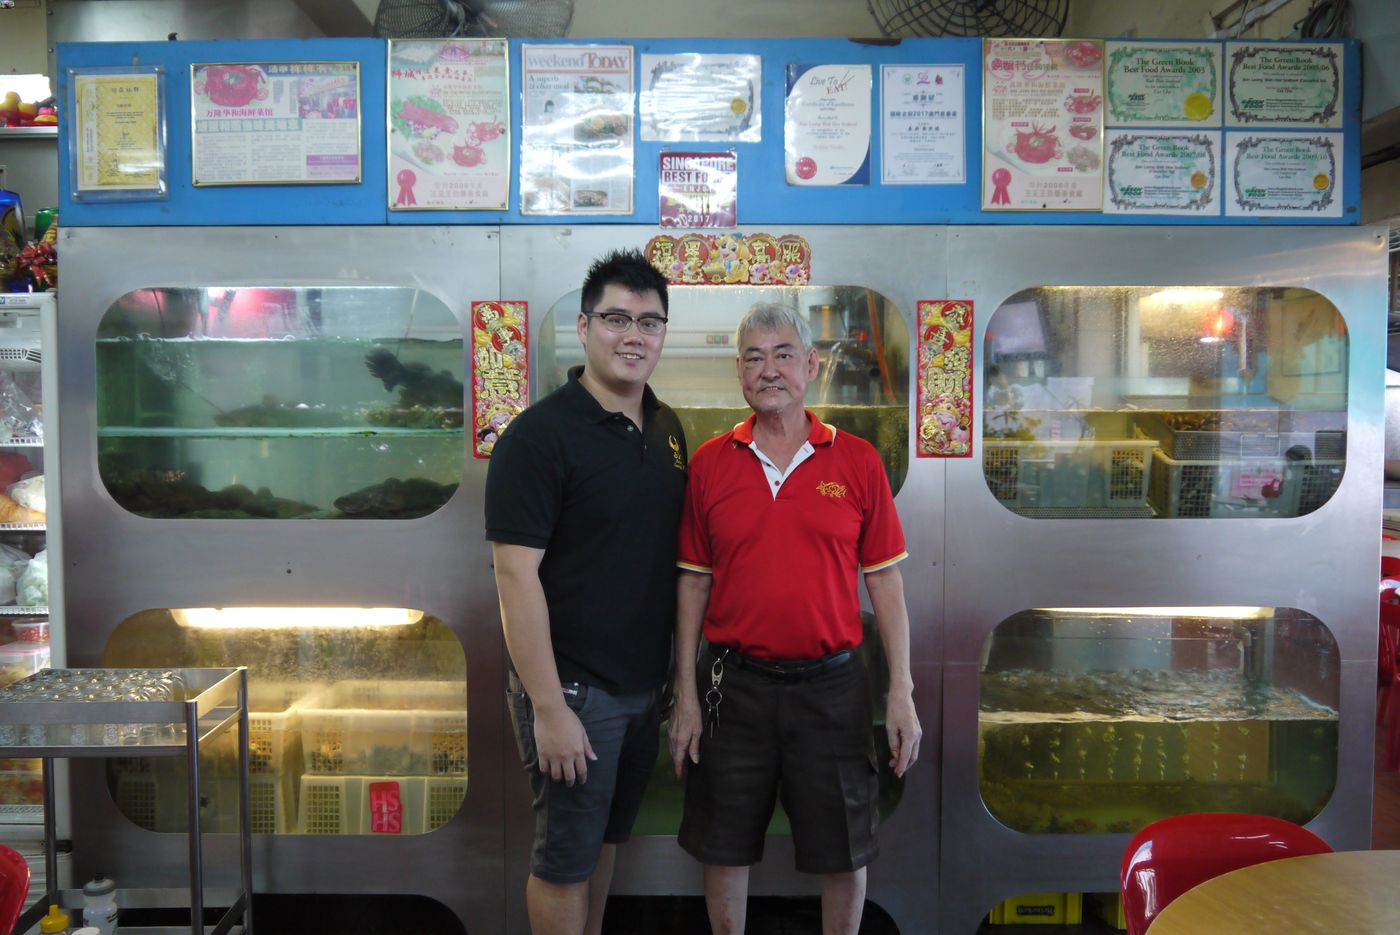 Mr Teh Chor Joo (right) and Mr Dextre Teh are the owners of Ban Leong Wah Hoe Seafood Restaurant. The older Mr Teh is also the chef of the three-decade-old eatery, while Dextre manages the administrative and marketing elements of the business.